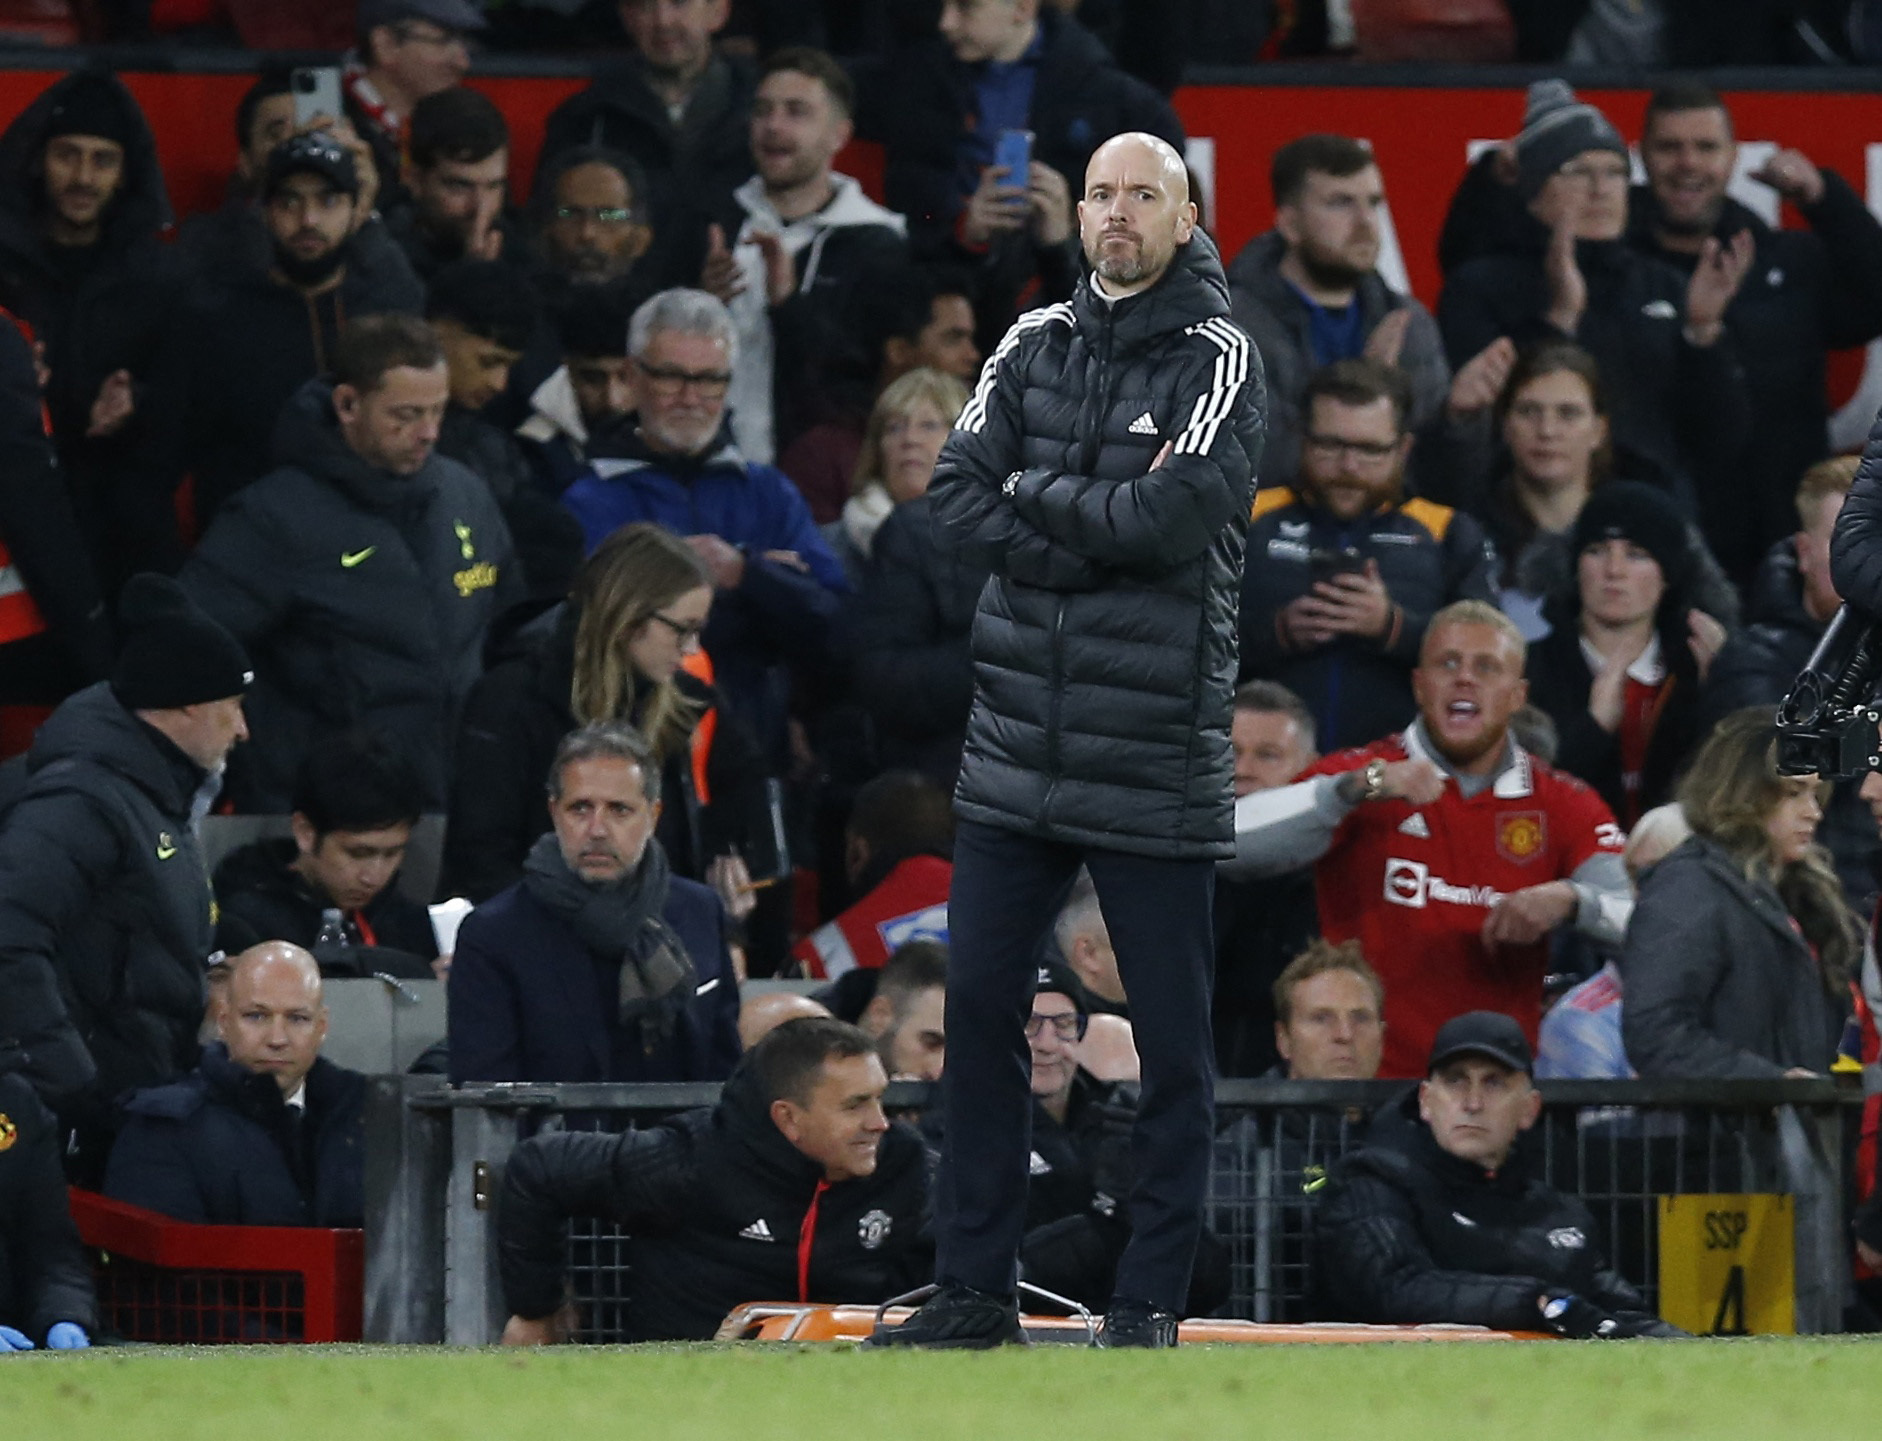 Ten Hag confirms Ronaldo refused to come on as sub against Spurs | Reuters